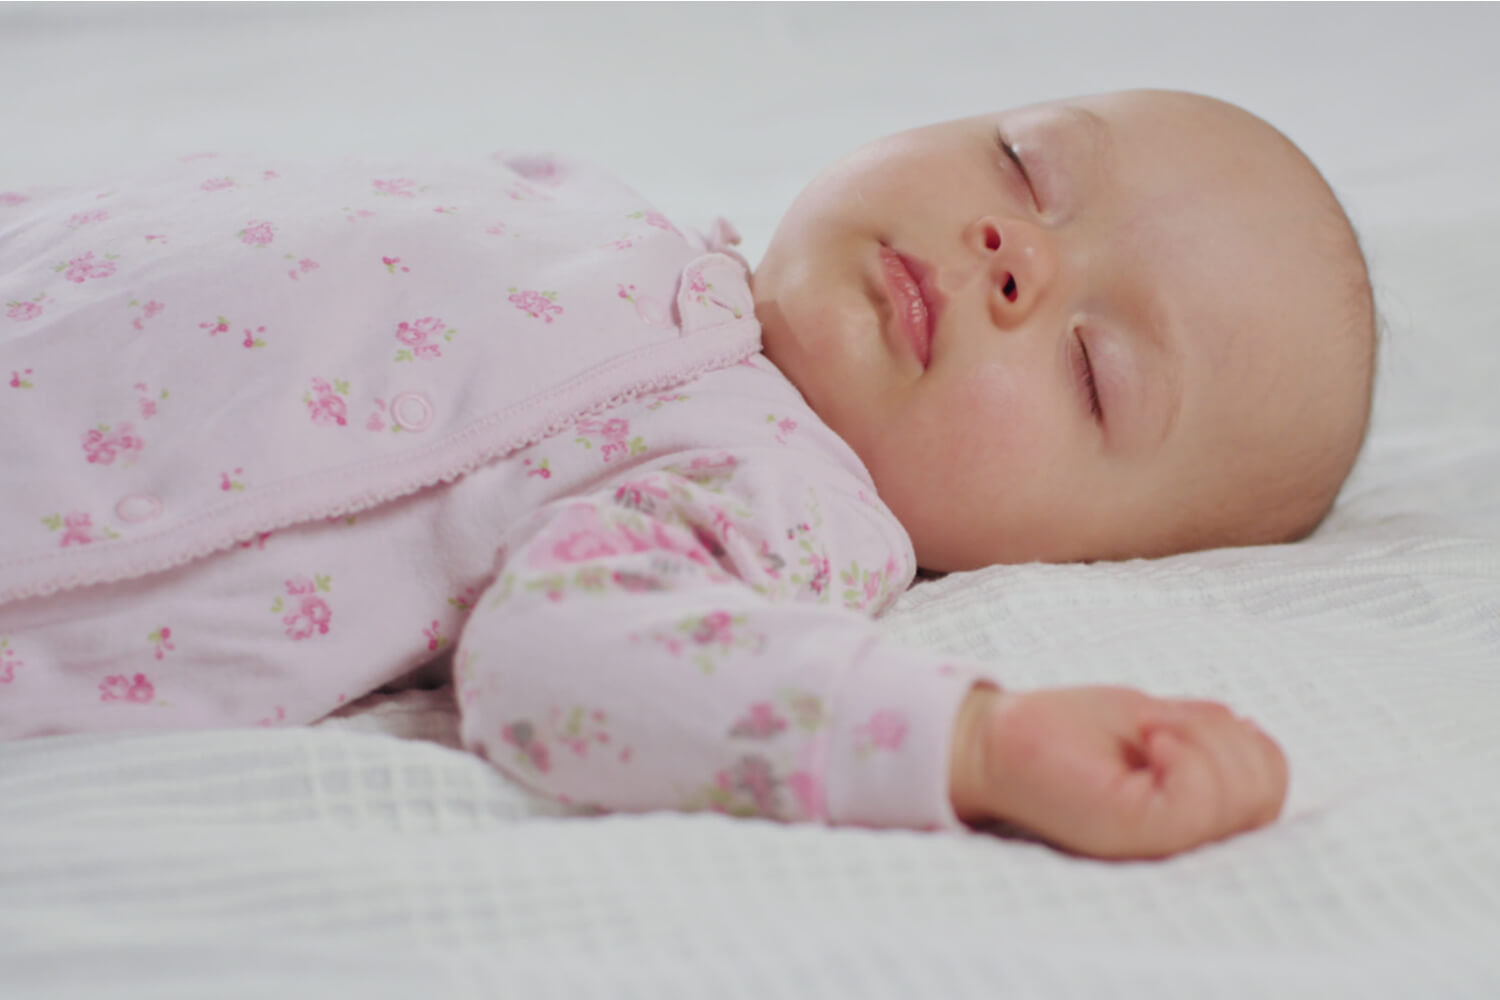 How To Keep Your Sleeping Baby Safe